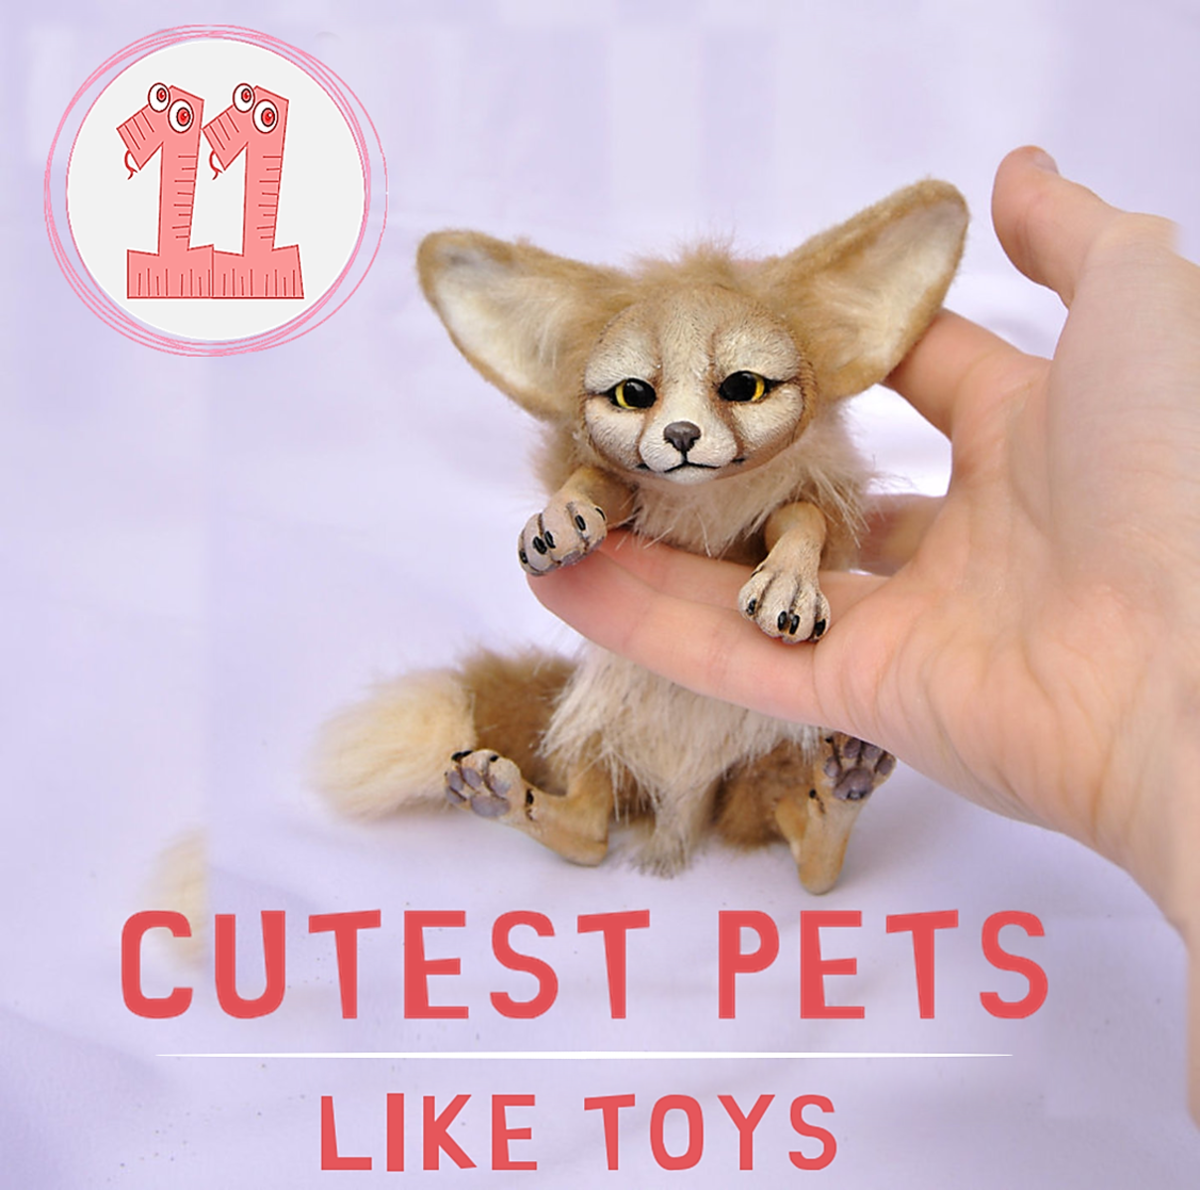 11 Cutest Exotic Pets Like Toys